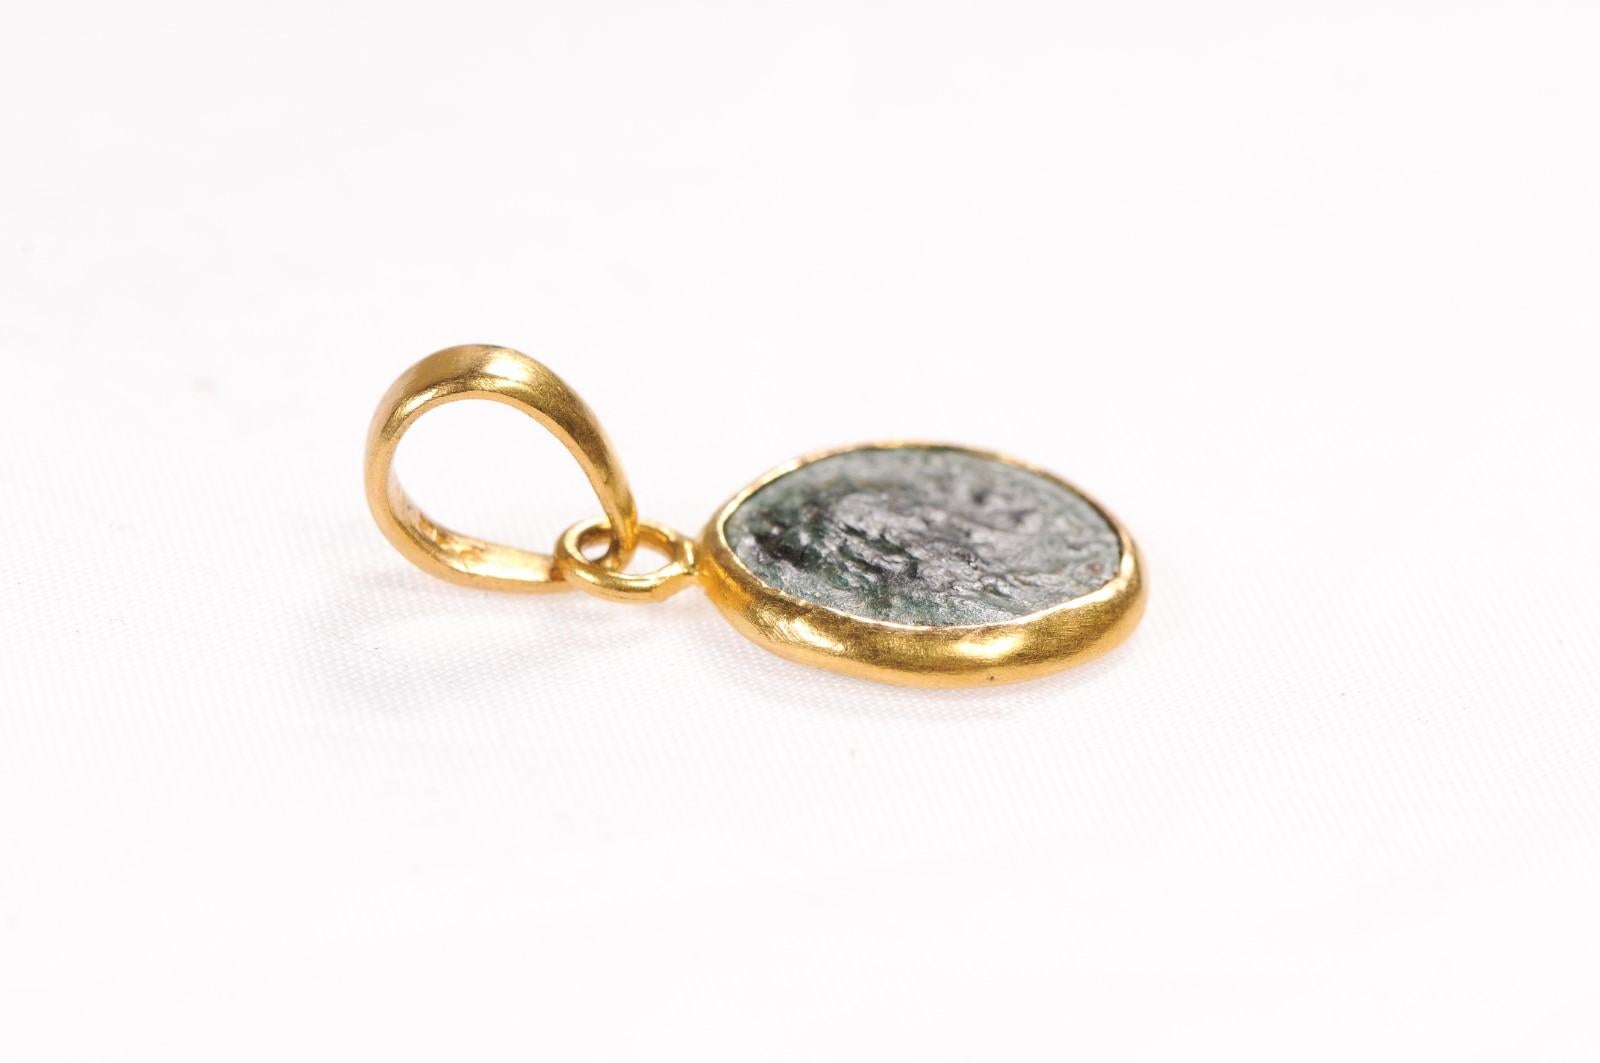 Roman Coin & Pyrite Necklace (pendant only) For Sale 1